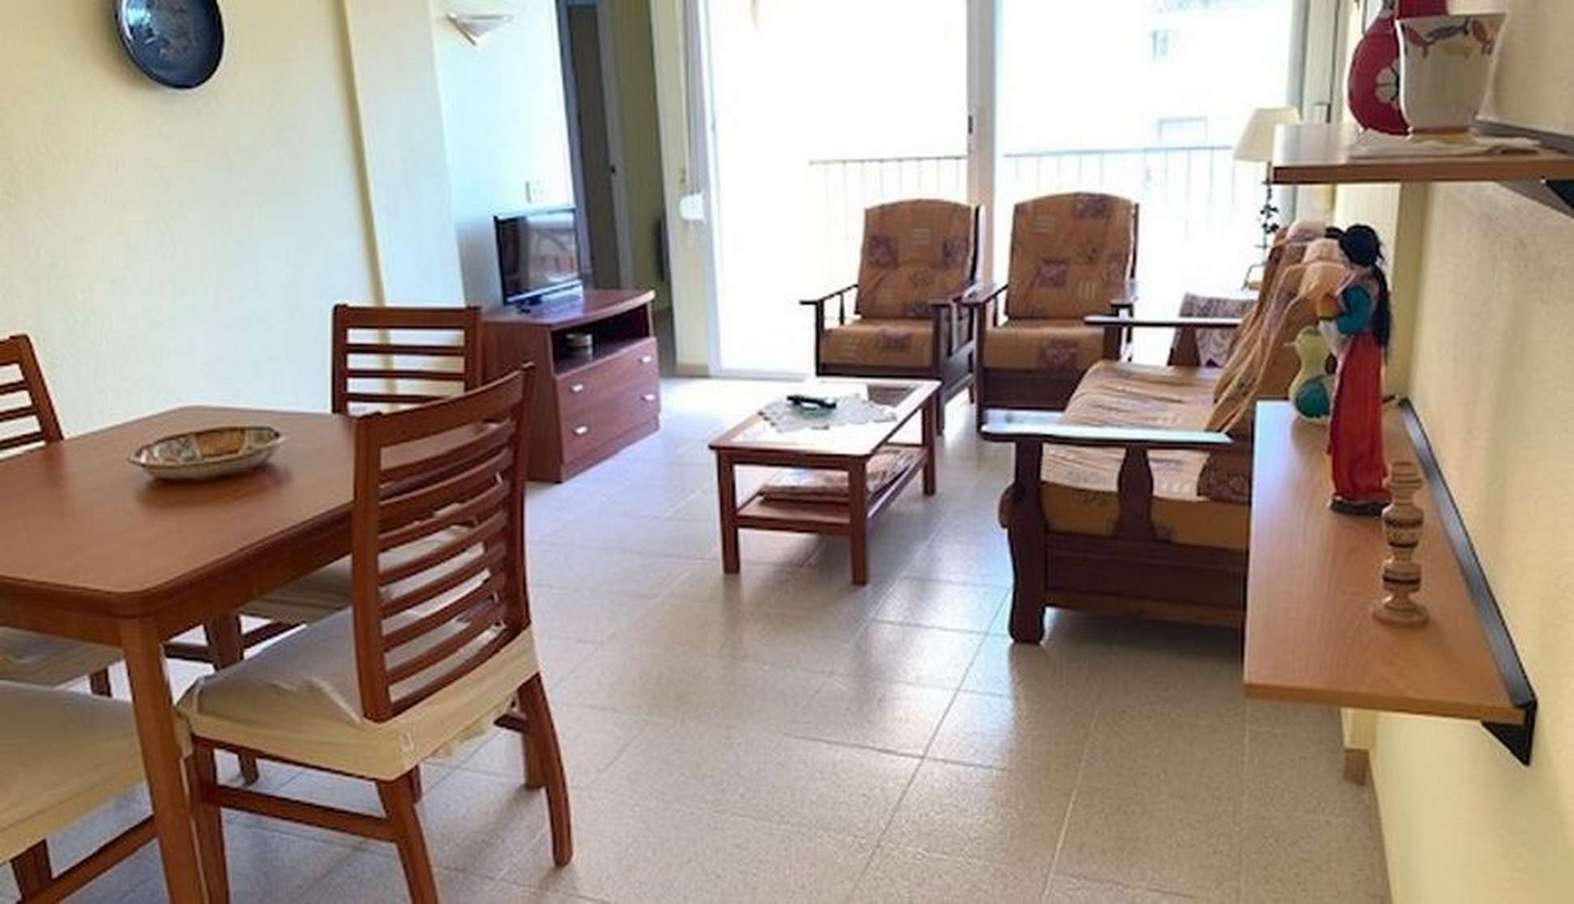 Beautiful 2 bedroom apartment with parking and pool, for sale in Santa Margarita